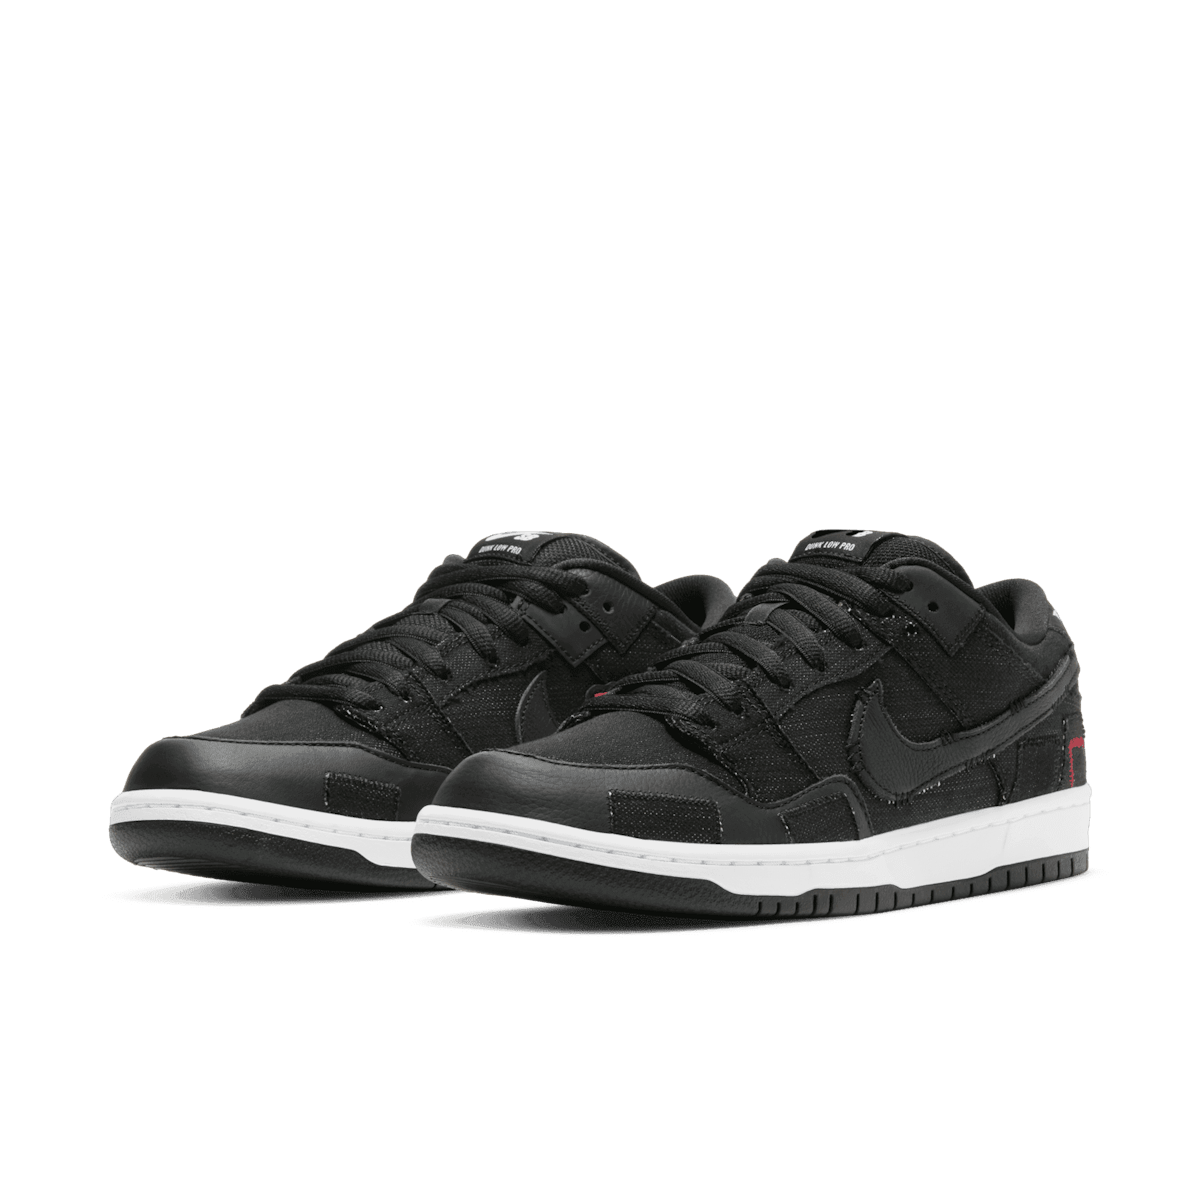 Nike SB Dunk Low Wasted Youth Angle 2